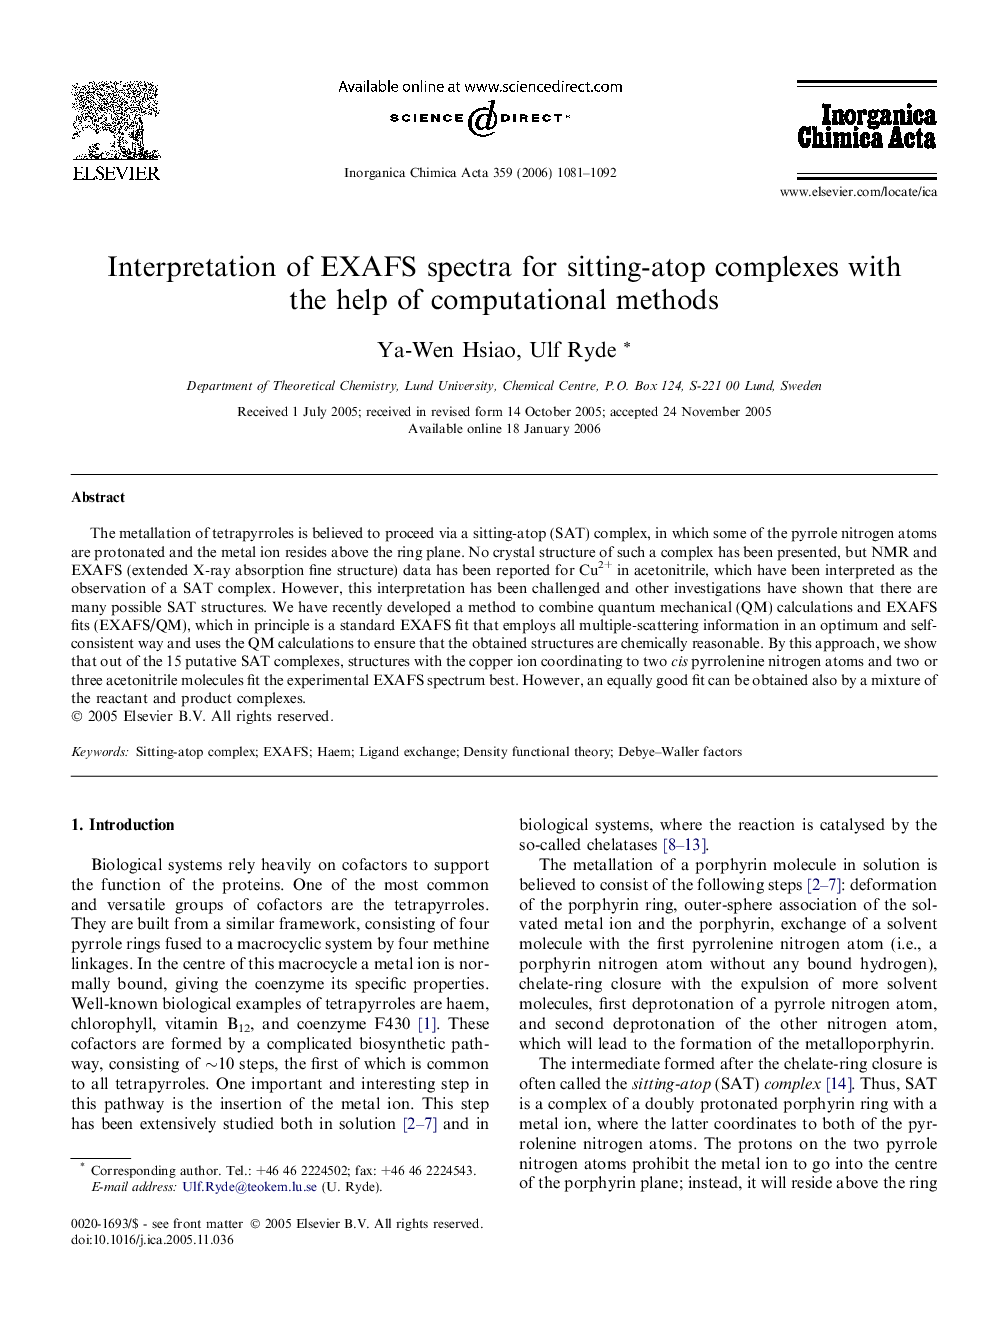 Interpretation of EXAFS spectra for sitting-atop complexes with the help of computational methods